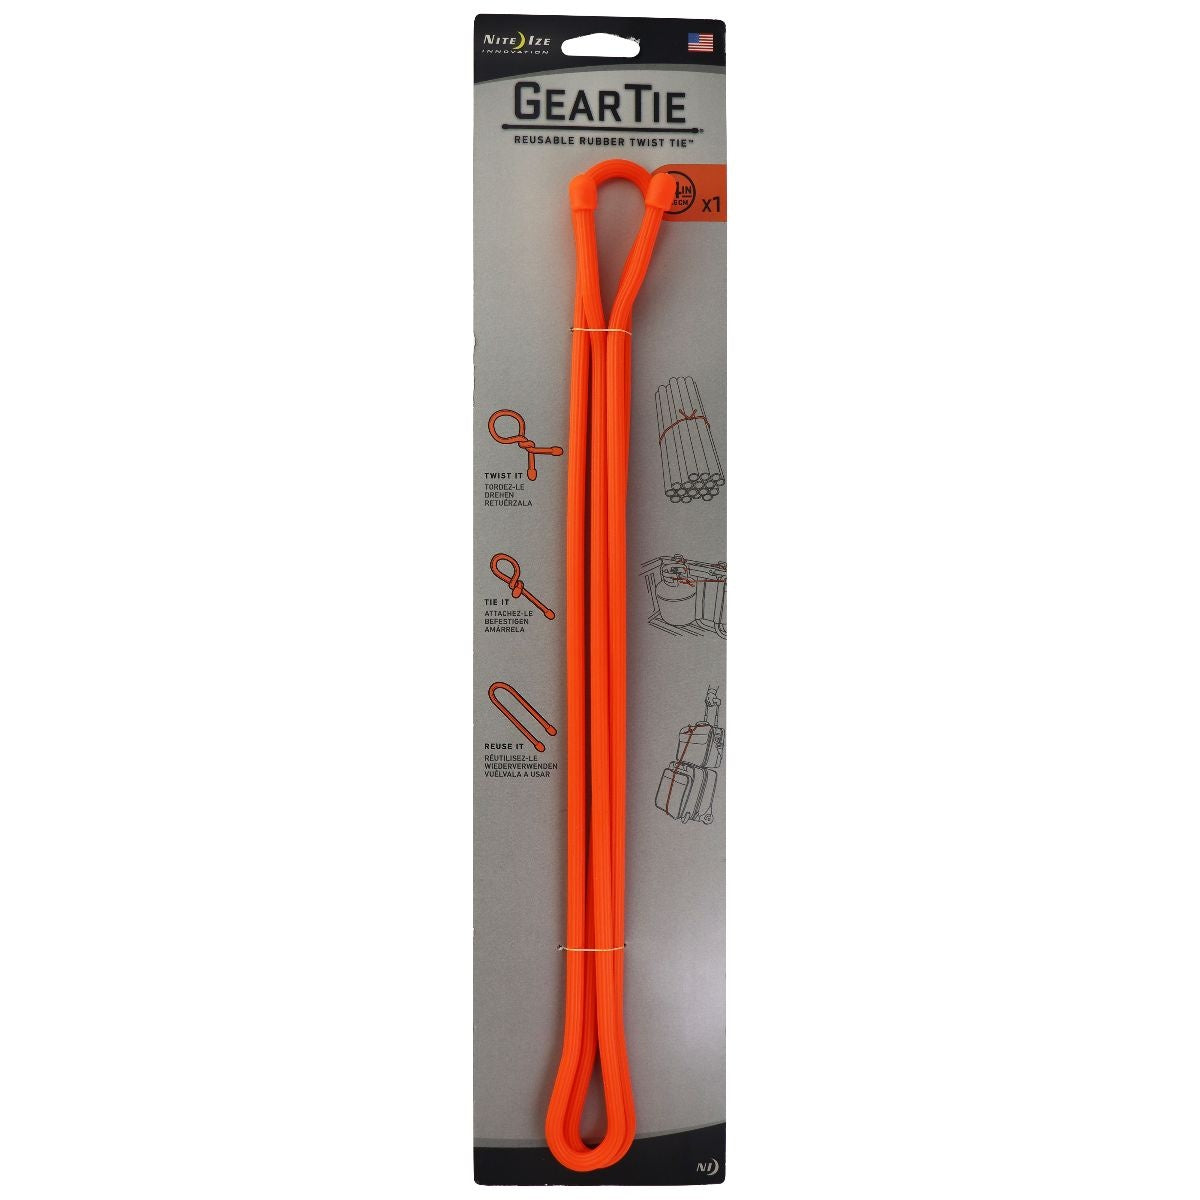 Nite Ize GearTie Reusable Rubber (64-inch) Twist Tie - Orange (Single) Home Improvement - Other Home Improvement Nite Ize    - Simple Cell Bulk Wholesale Pricing - USA Seller